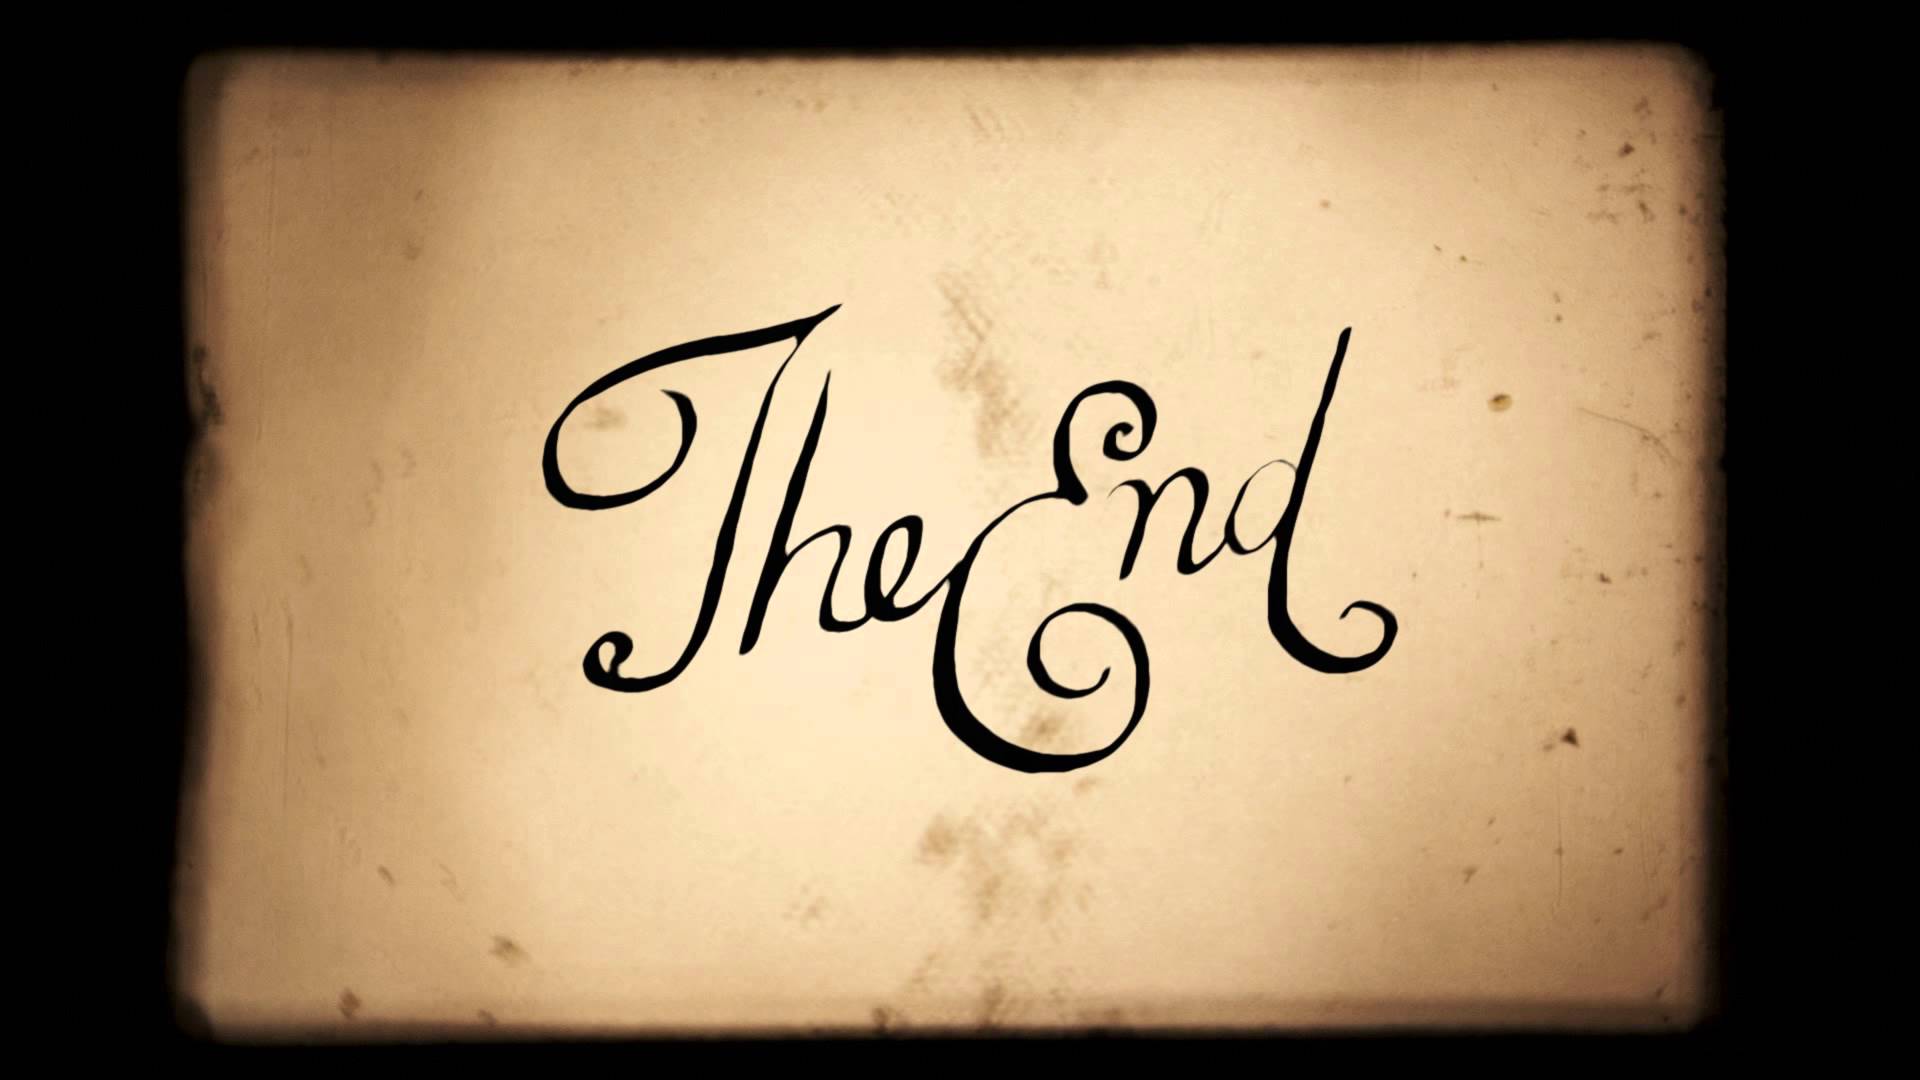 8mm film vintage the end - YouTube